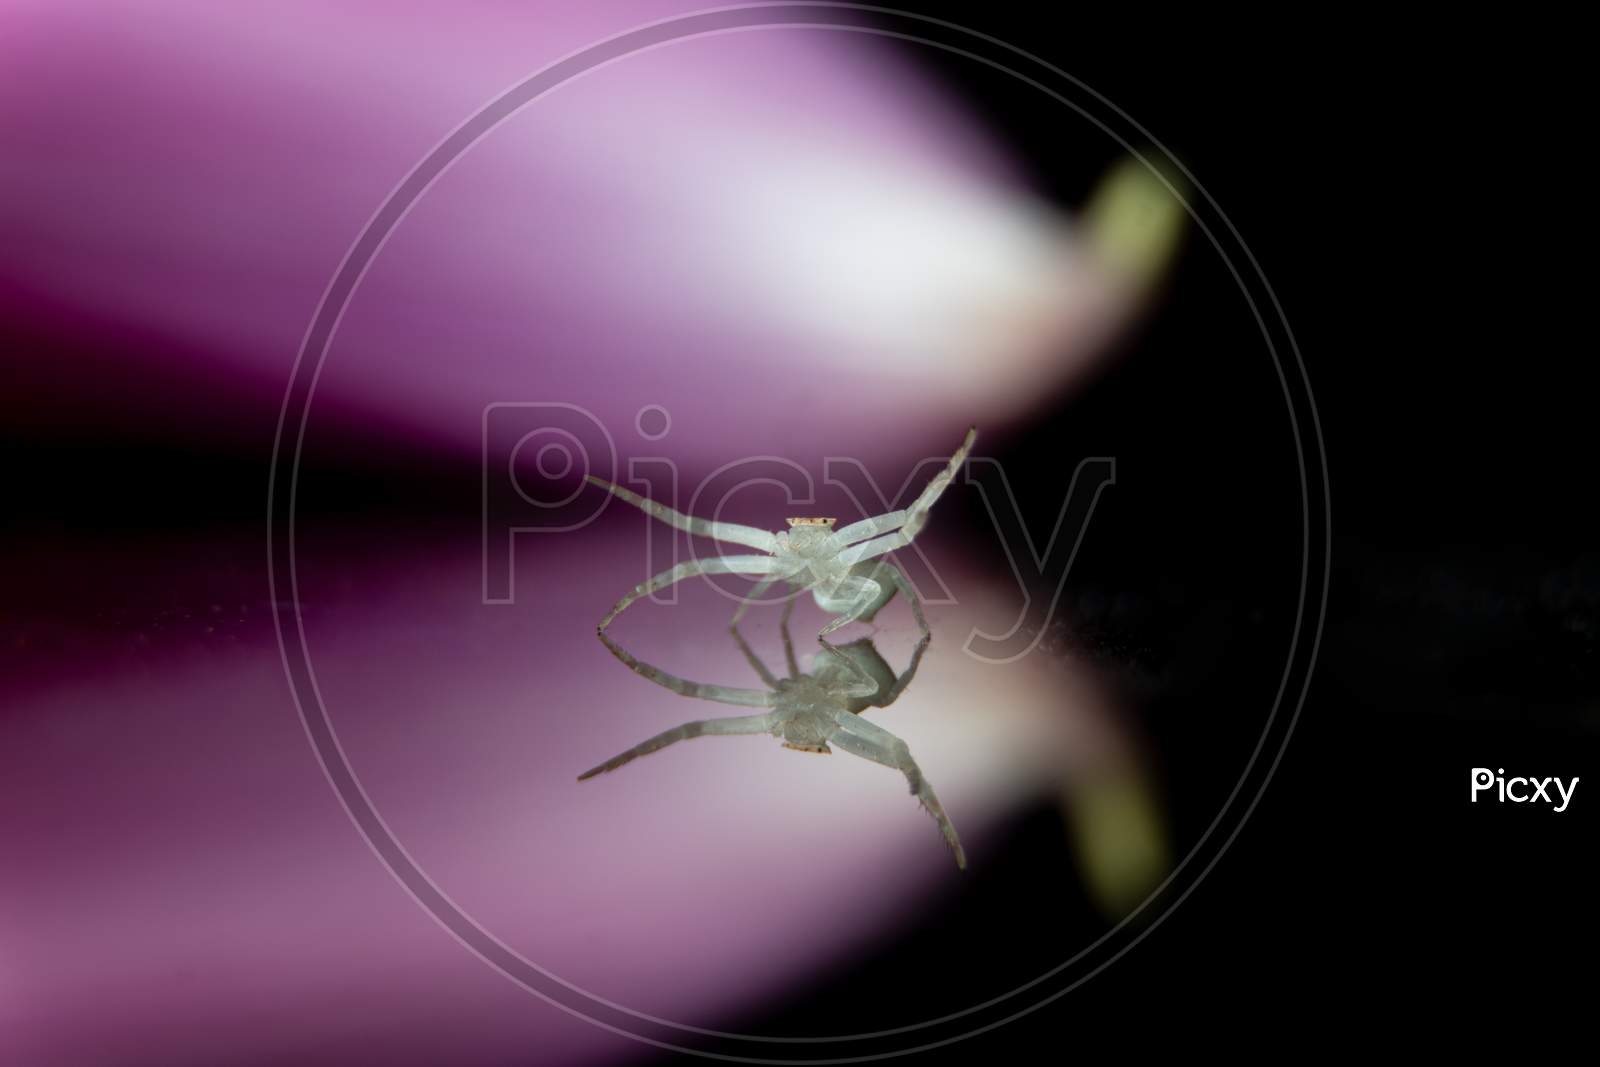 White Crab Spider In A Beautiful Pose